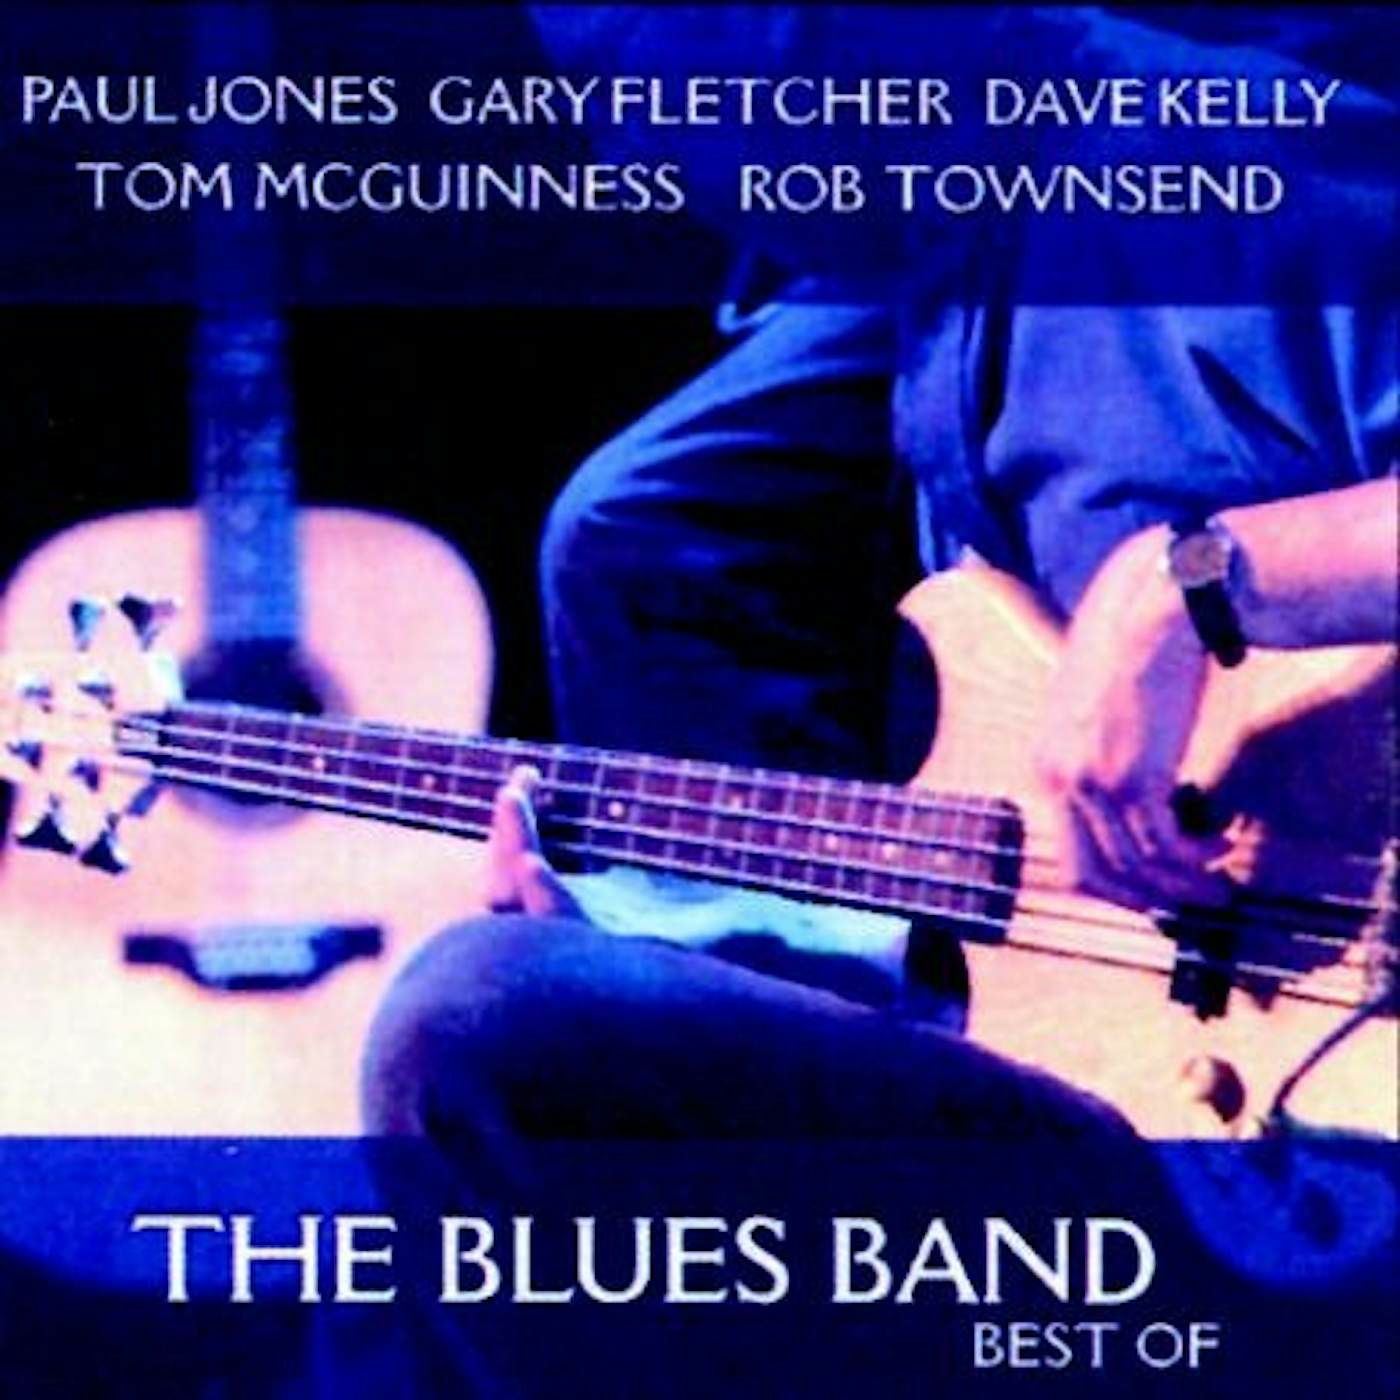 BEST OF The Blues Band CD